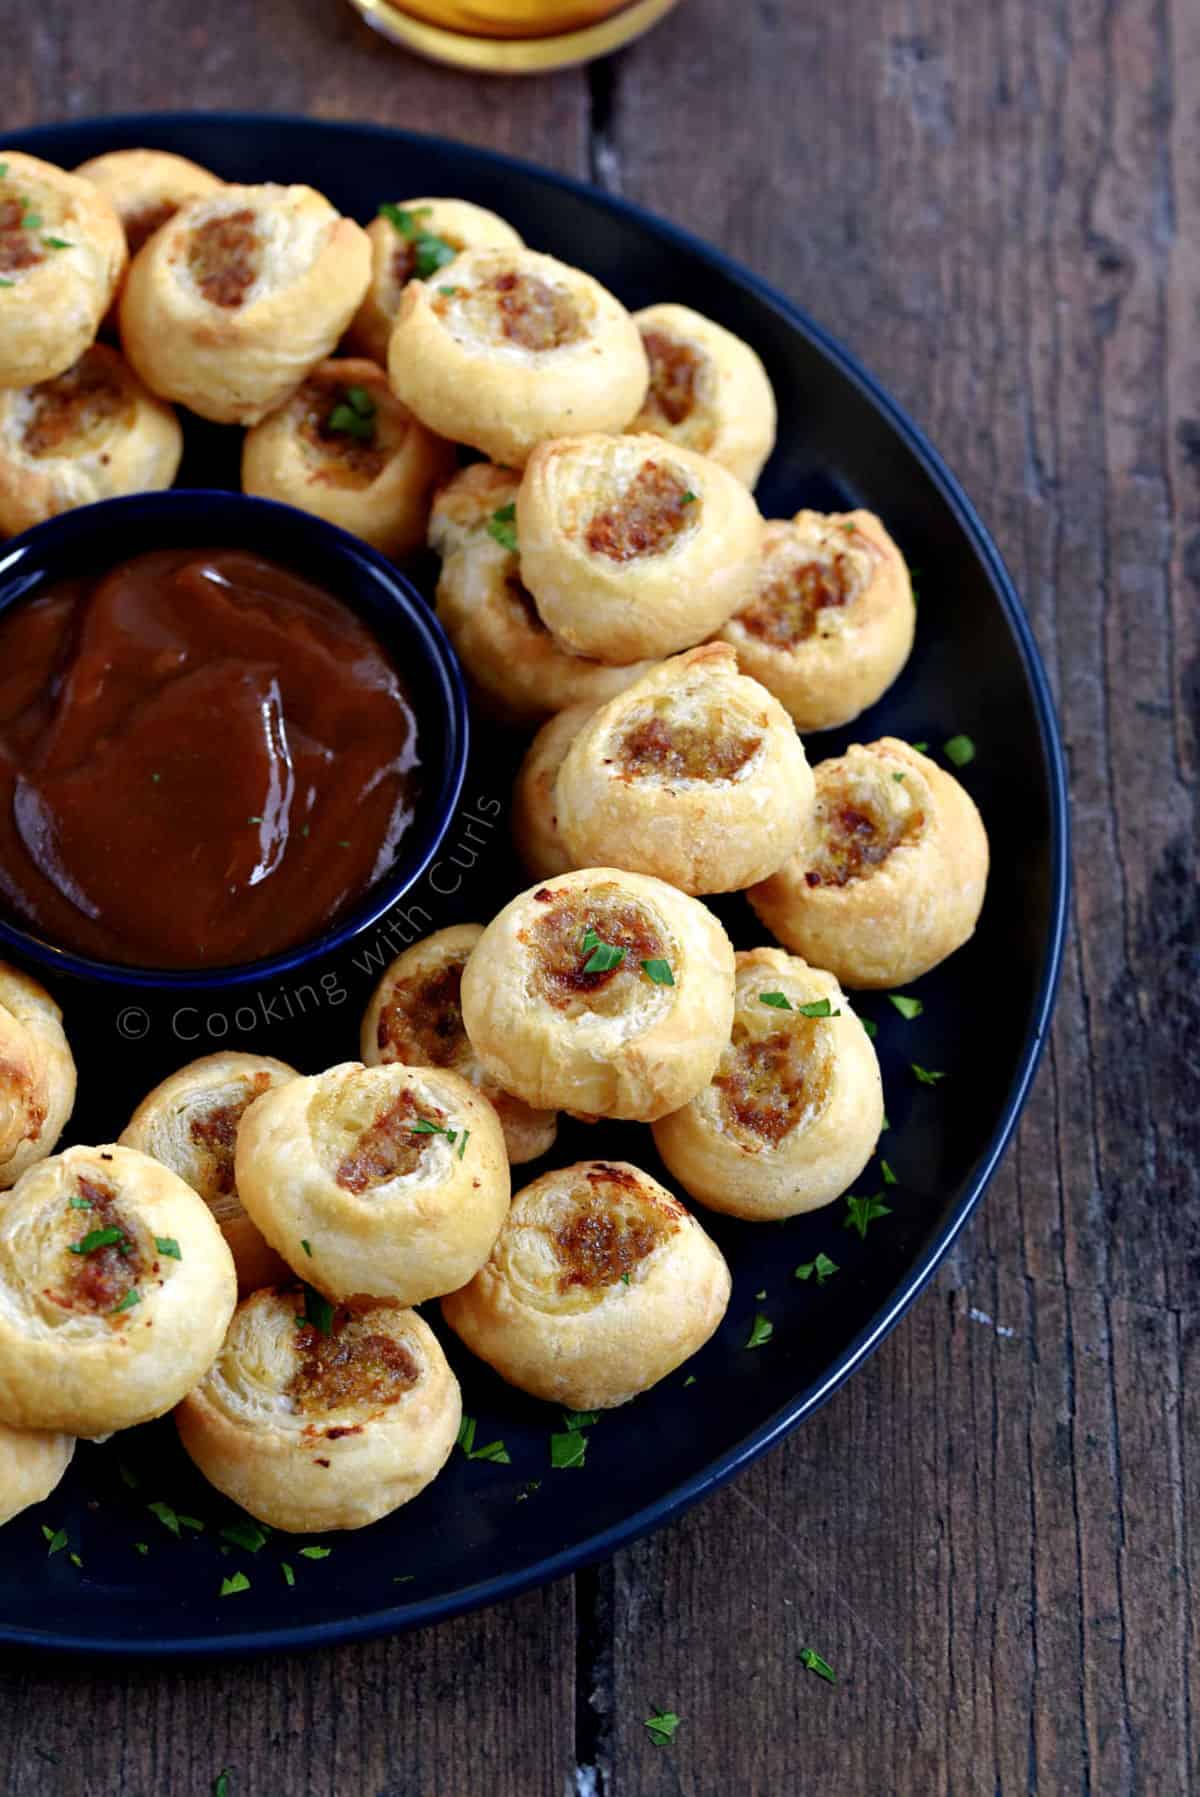 Puff pastry sausage bites stacked on a large plate with a bowl of dipping sauce in the center.